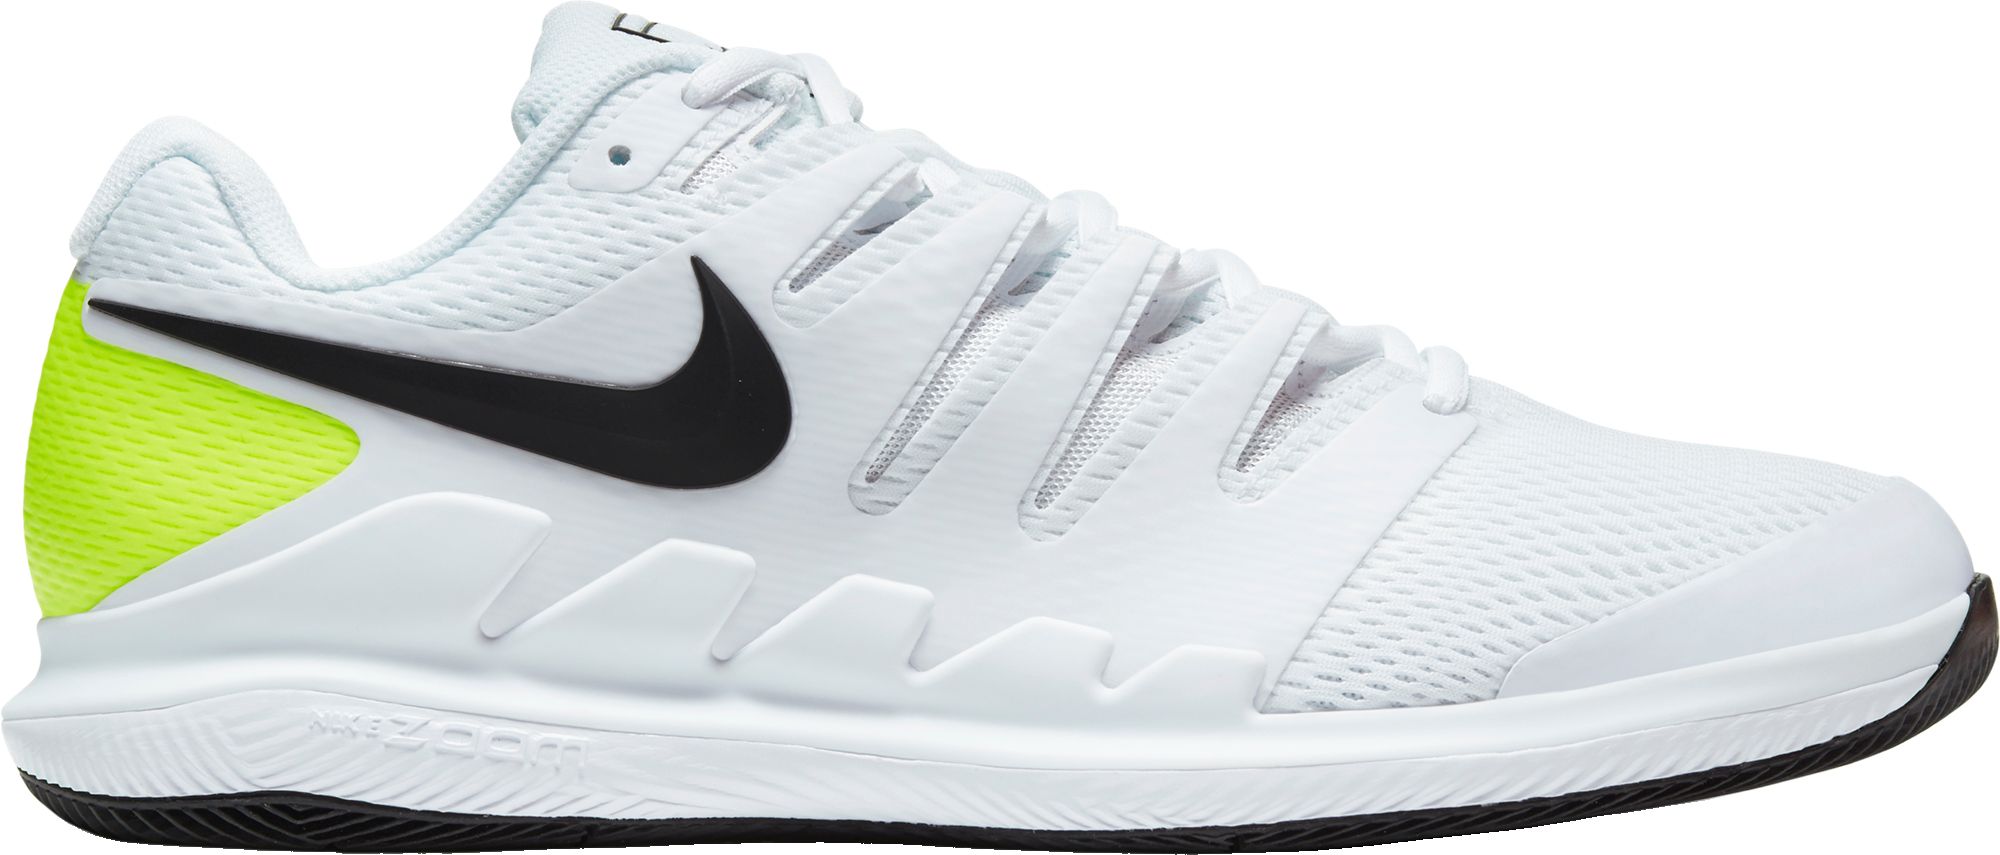 mens nike running shoes clearance